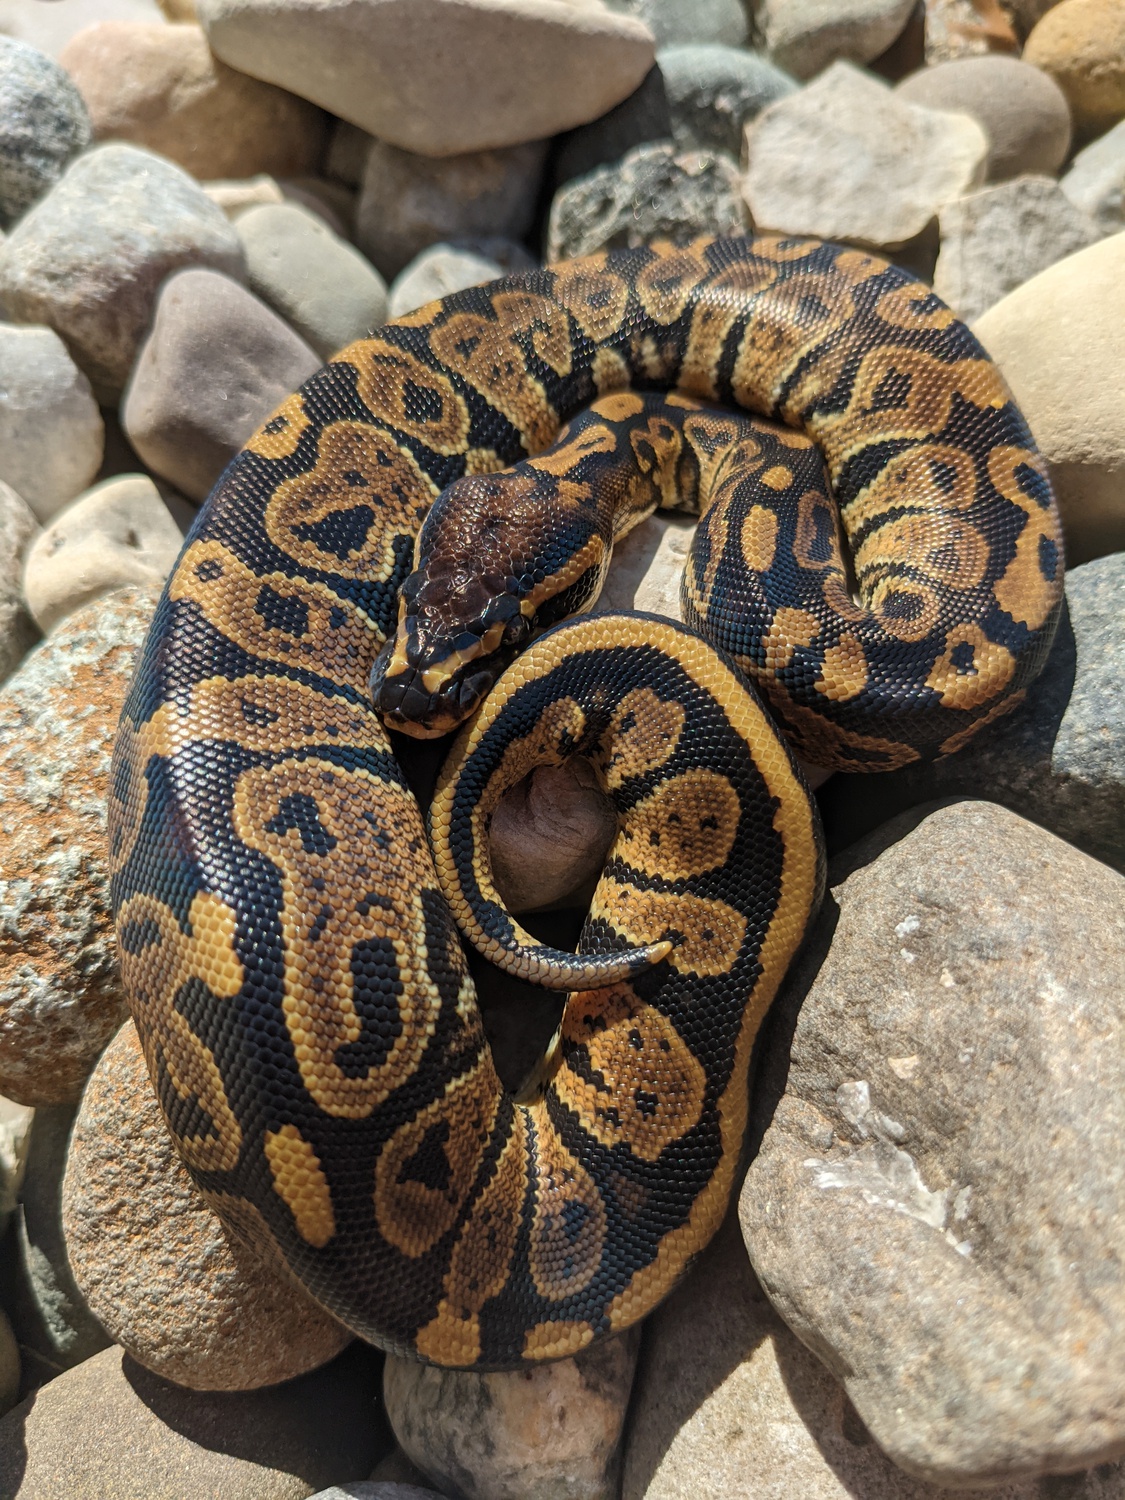 Twister Ball Python by BoopNoodles